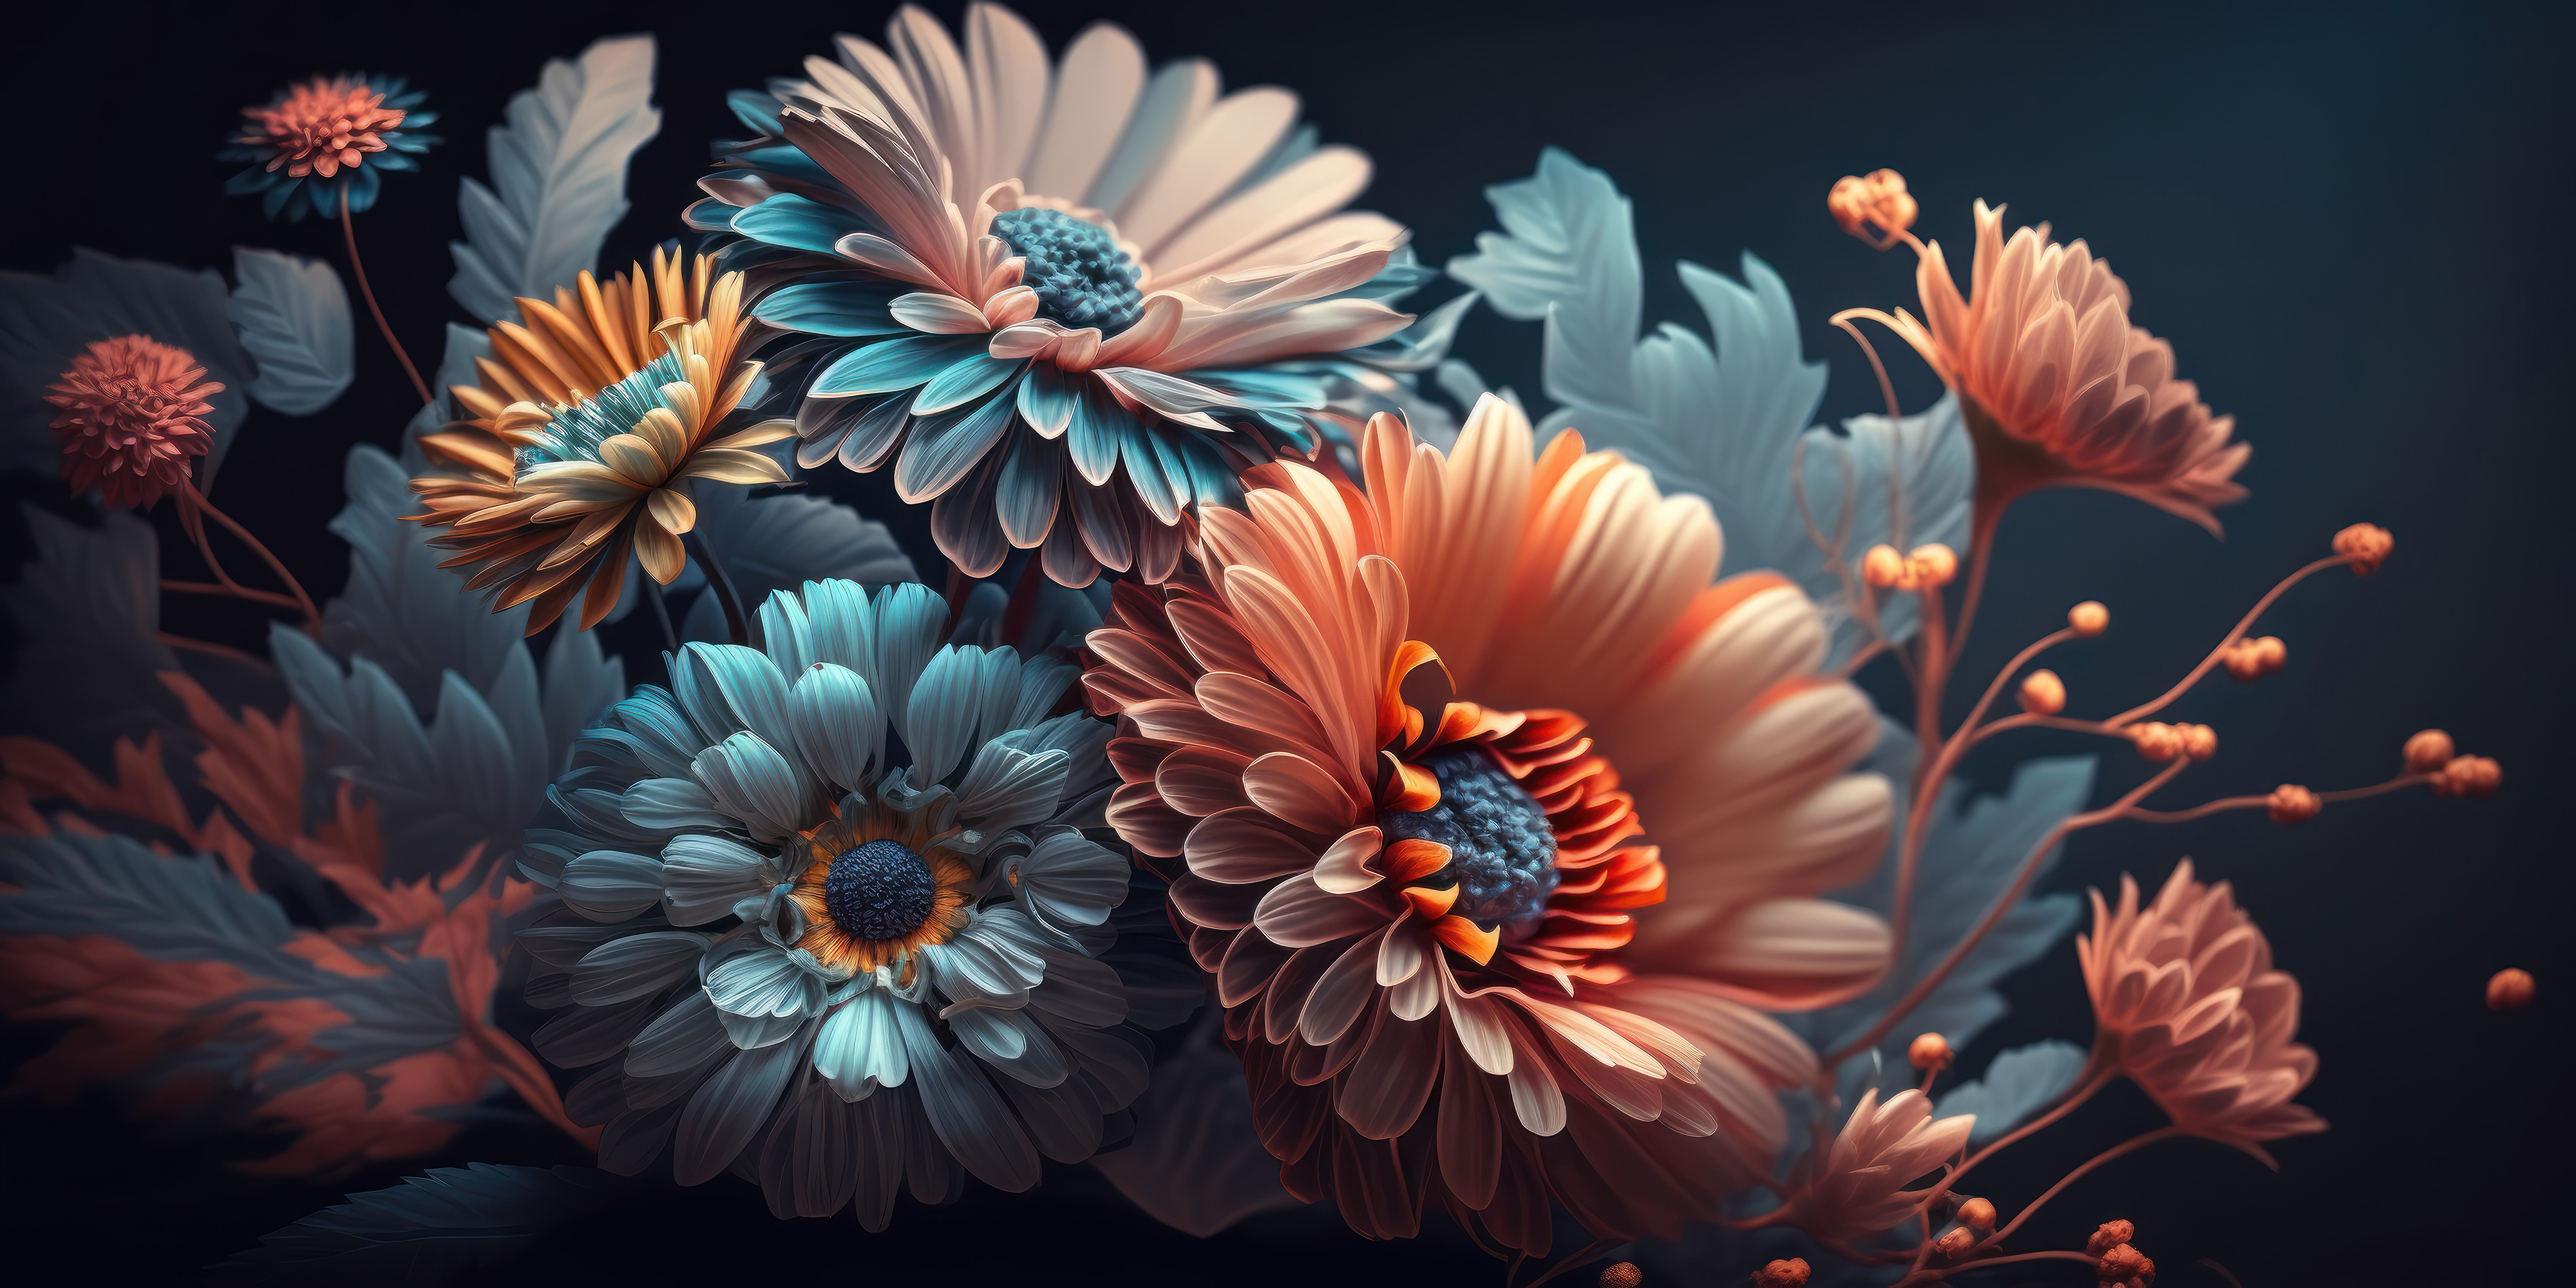 blossom-floral-bouquet-decoration-colorful-beautiful-flowers-background-garden-flowers-plant-pattern-wallpapers-greeting-cards-postcards-design-wedding-invites.jpg